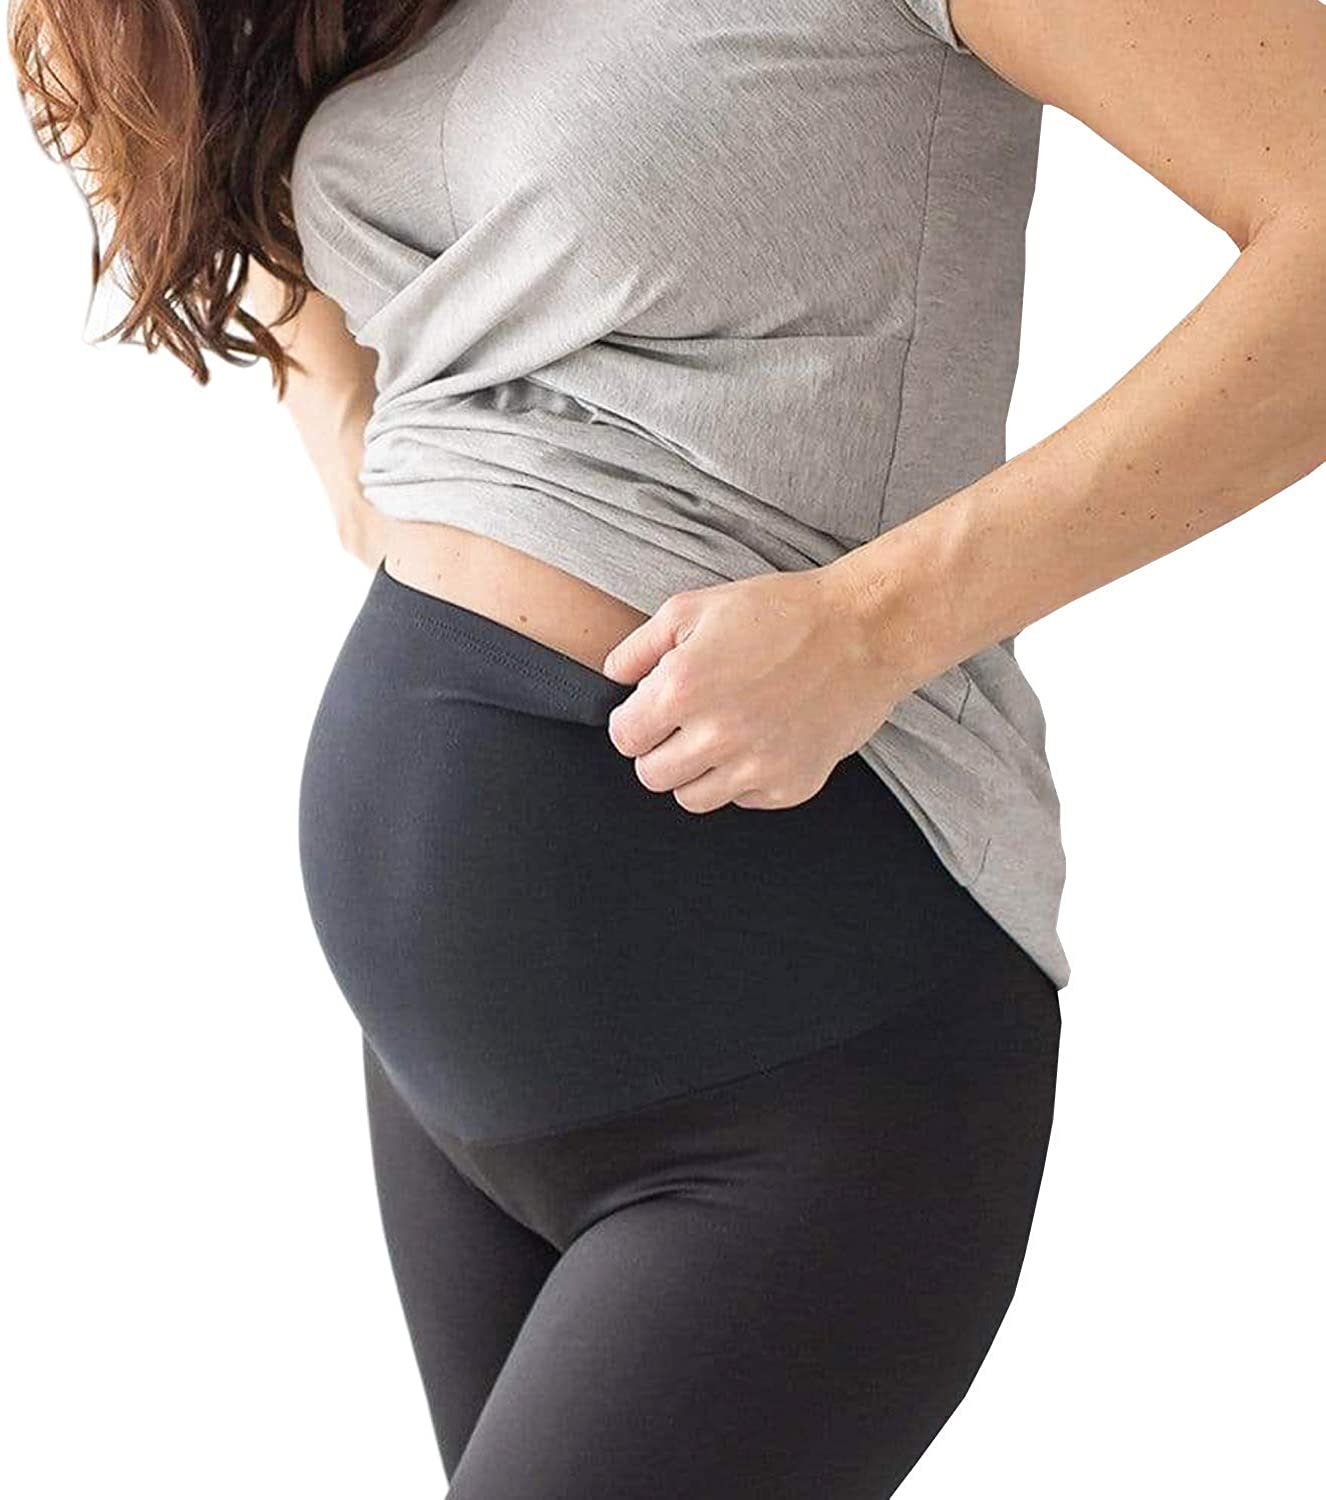 Maternity Leggings Over The Belly - Secret Fit Belly Maternity Workout ...